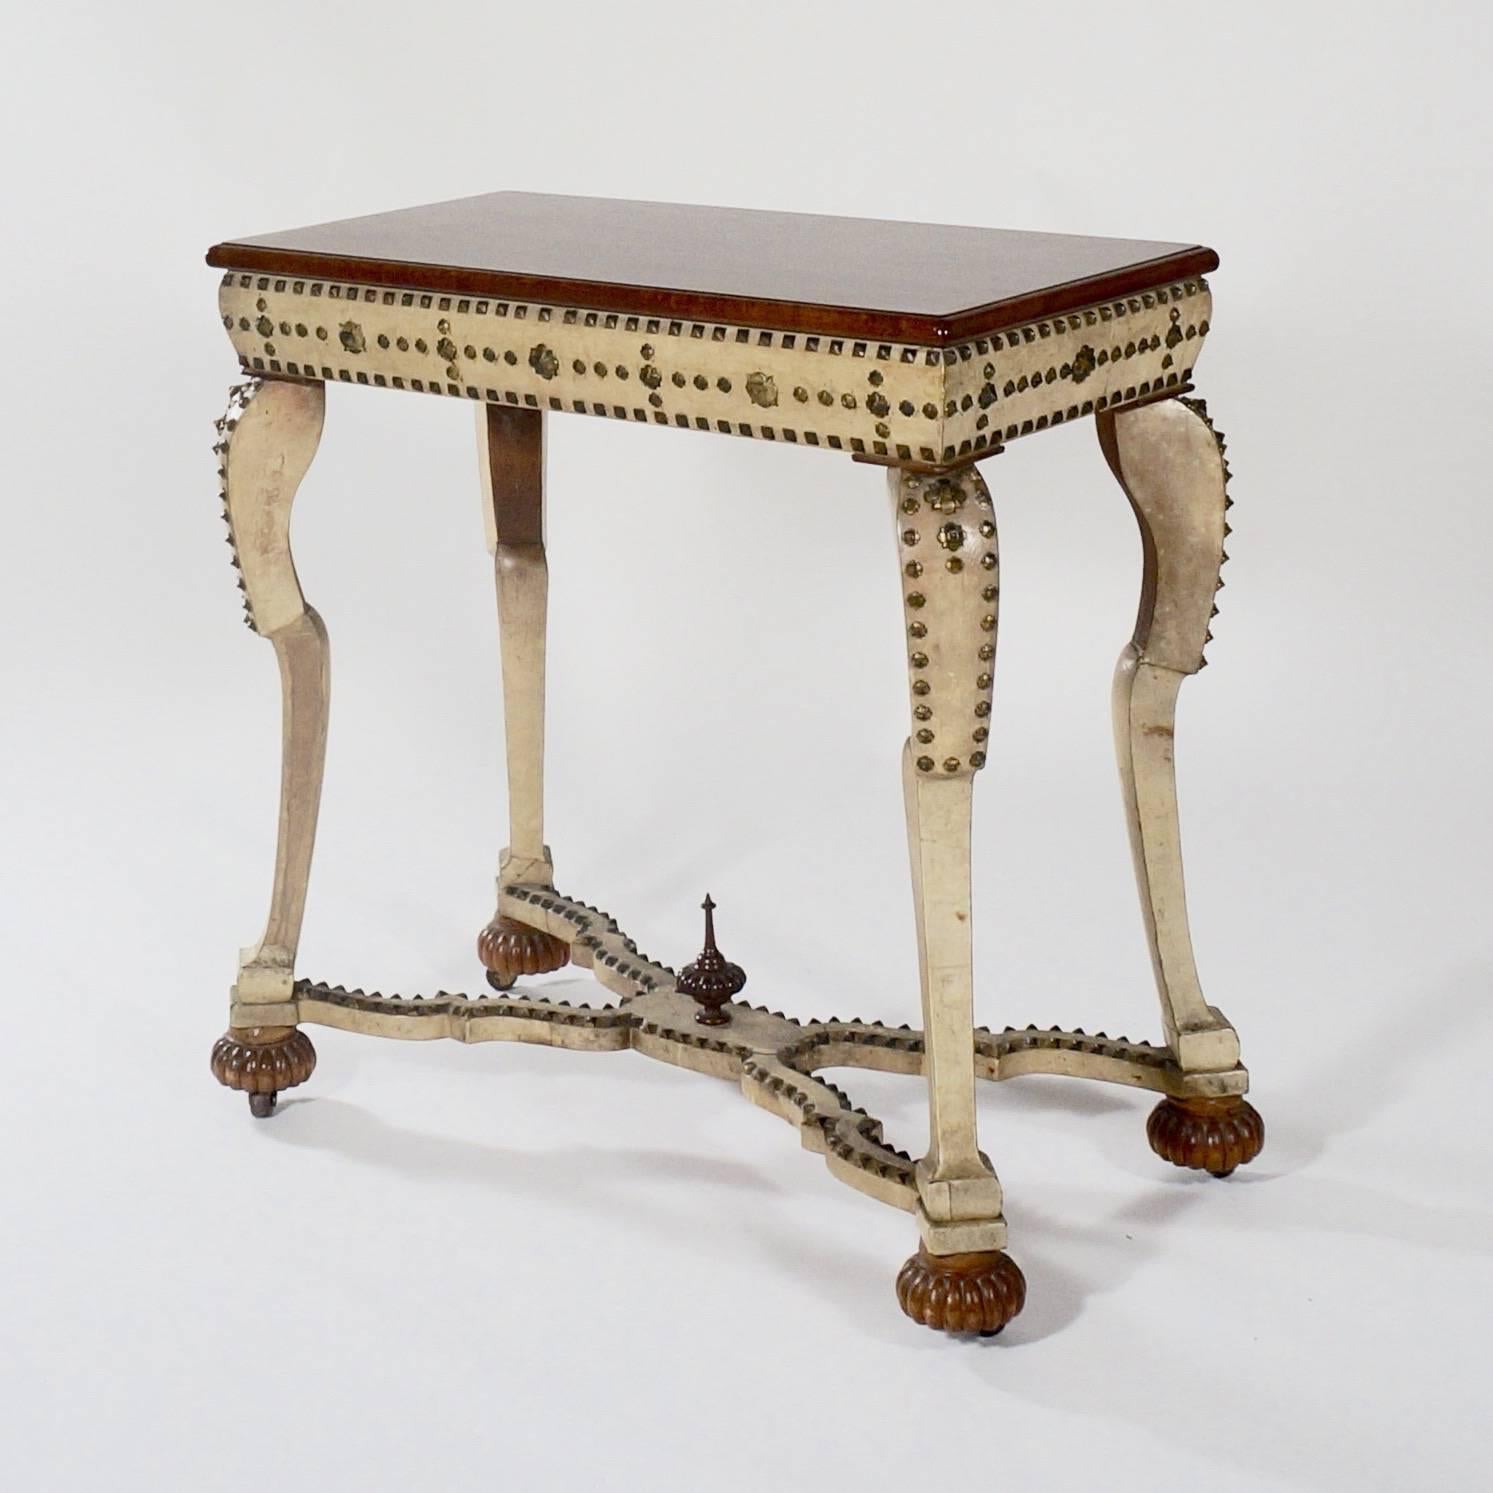 Spanish Colonial Vellum Covered Side Table with a Walnut Top